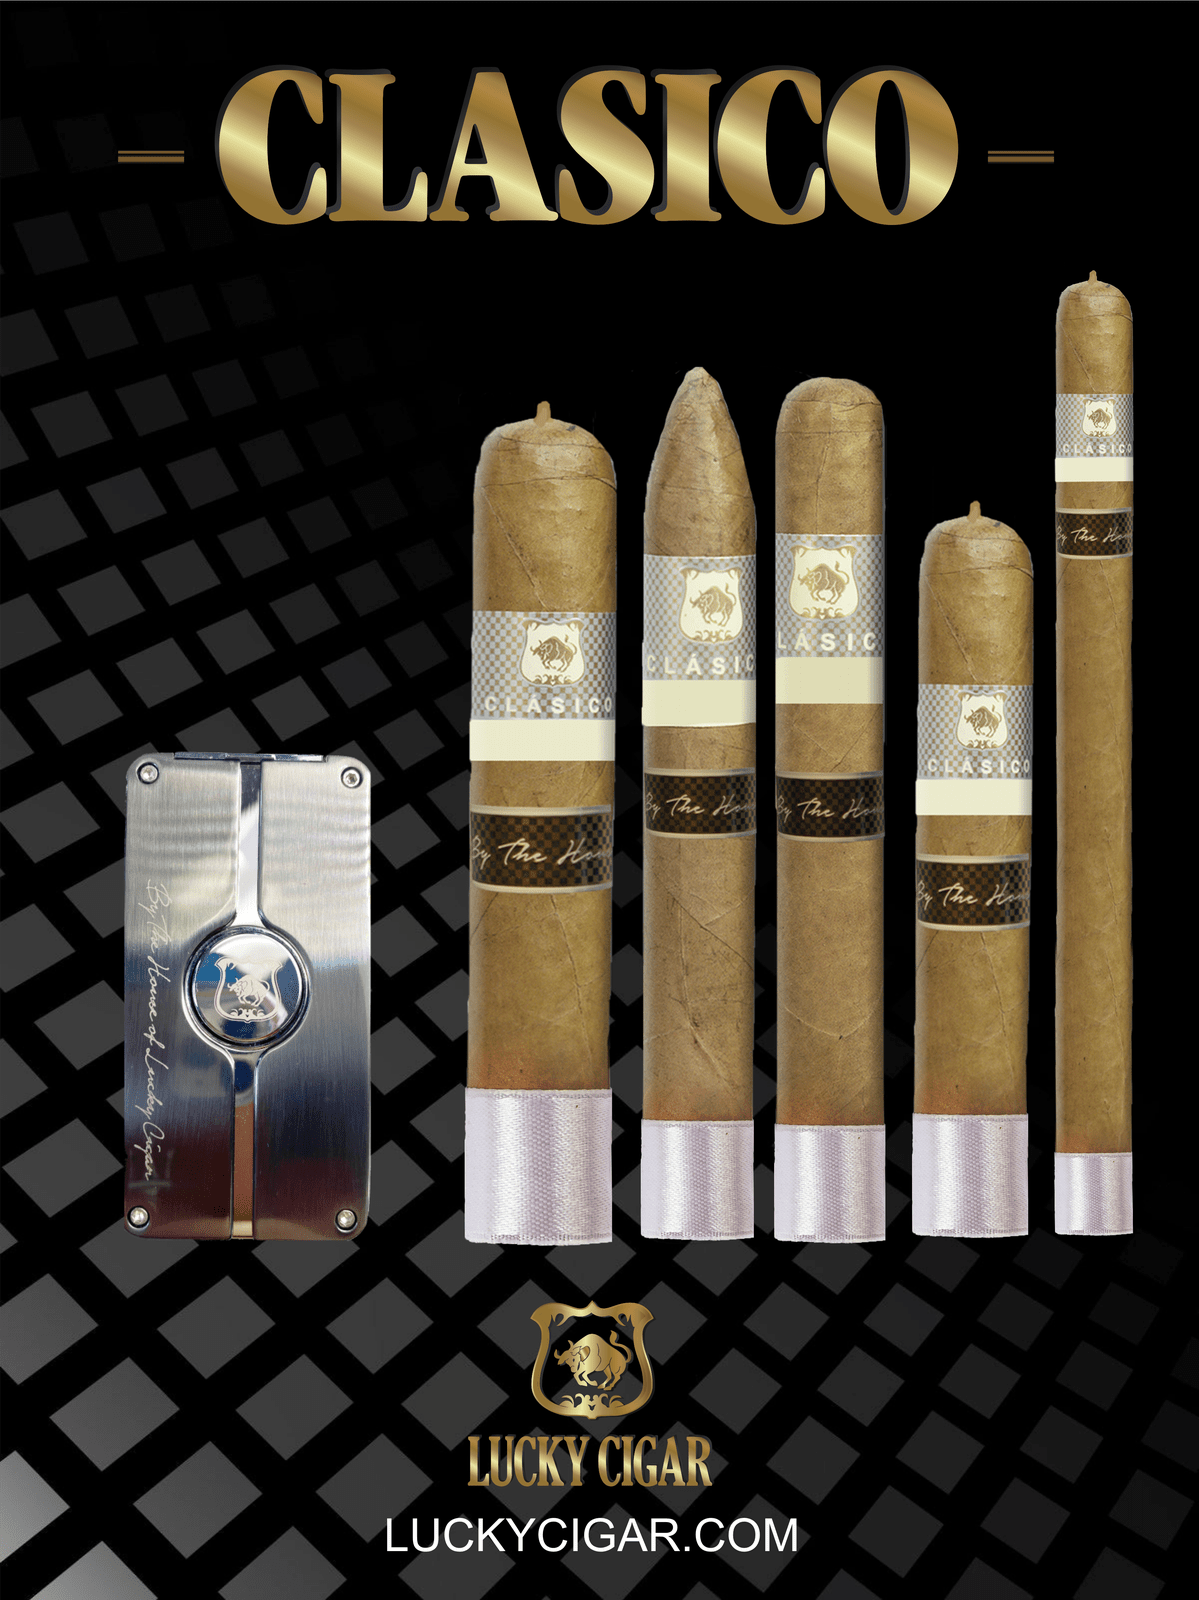 Classic Cigars - Classico by Lucky Cigar: Set of 5 Cigars, Robusto, Lancero, Toro, Torpedo, Gordo with Lighter